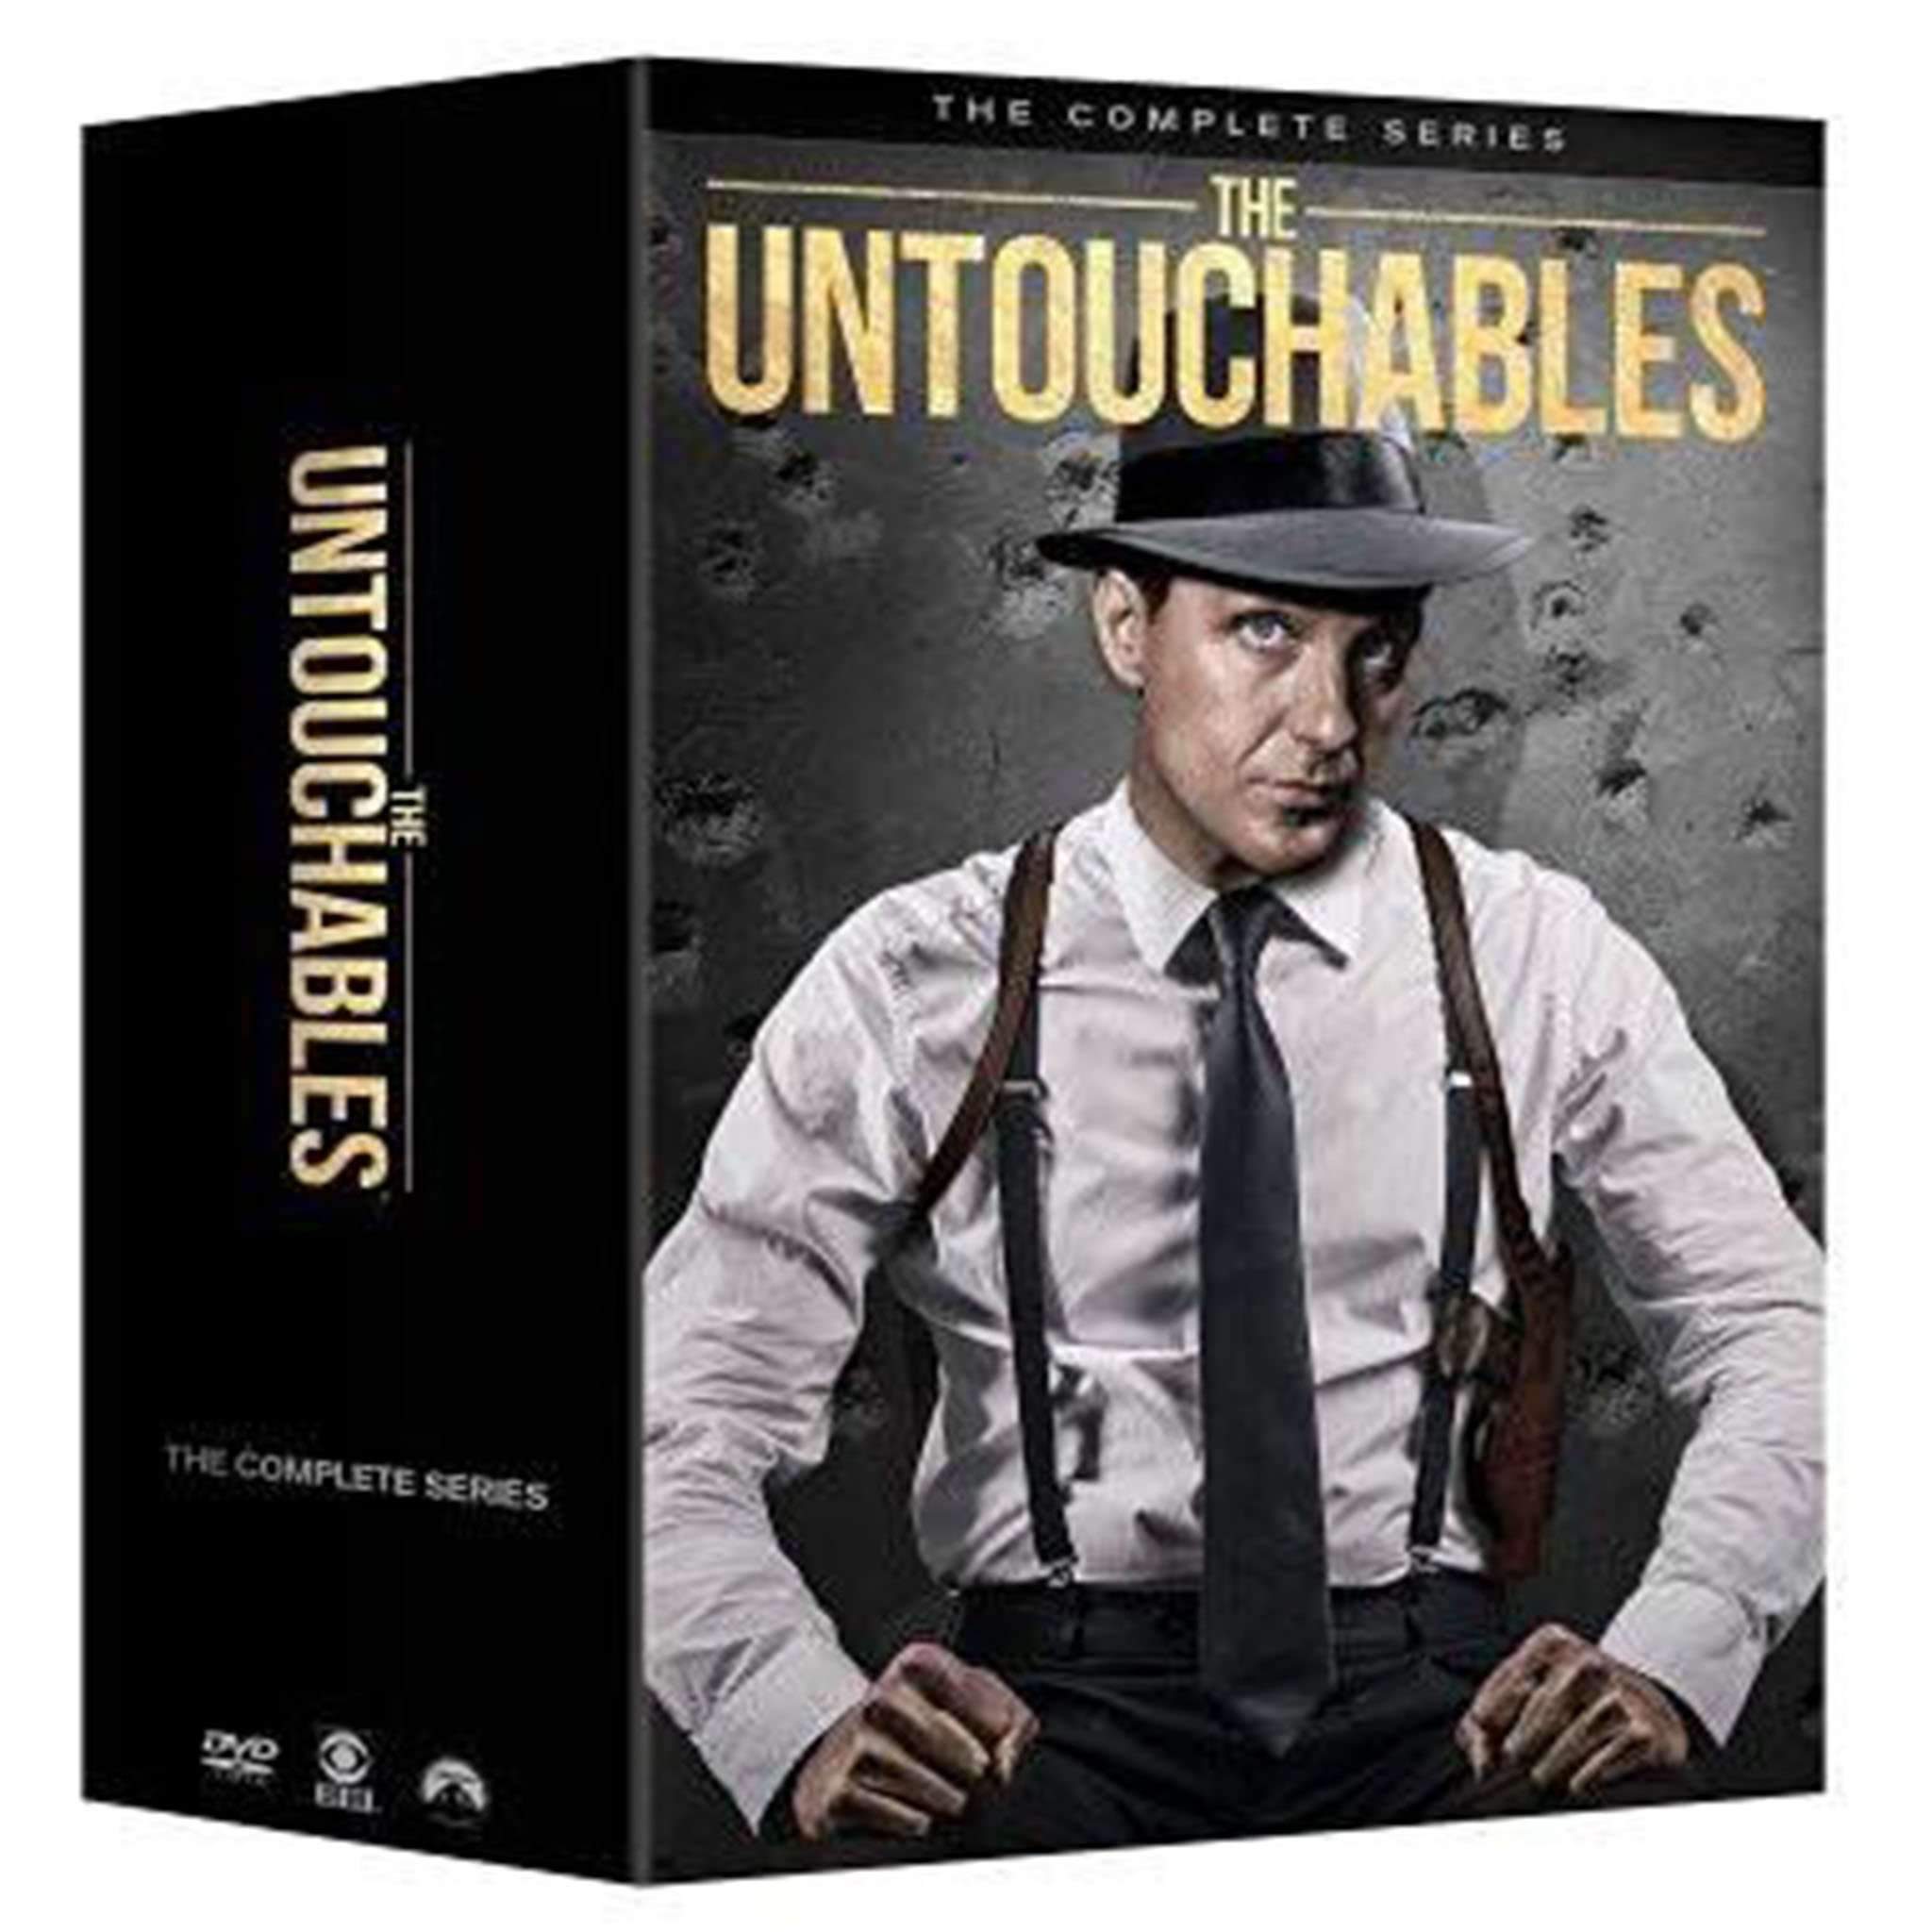 The Untouchables: The Complete Series (DVD) Paramount Home Entertainment DVDs & Blu-ray Discs > DVDs > Box Sets